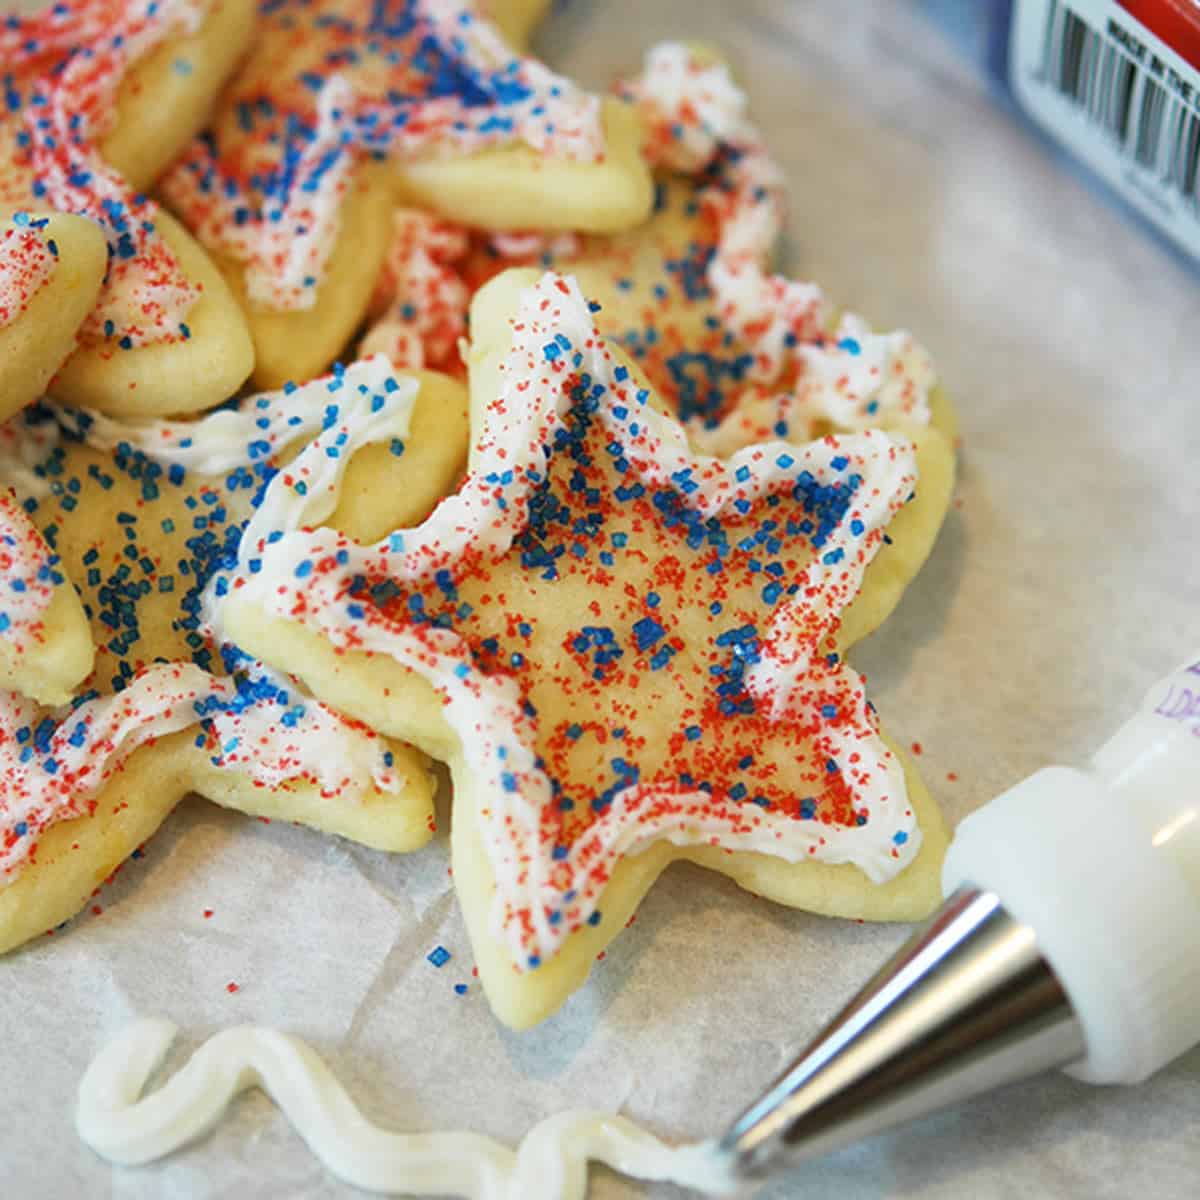 4th of July, star cookies with white piping around the edges and red and blue sprinkles.